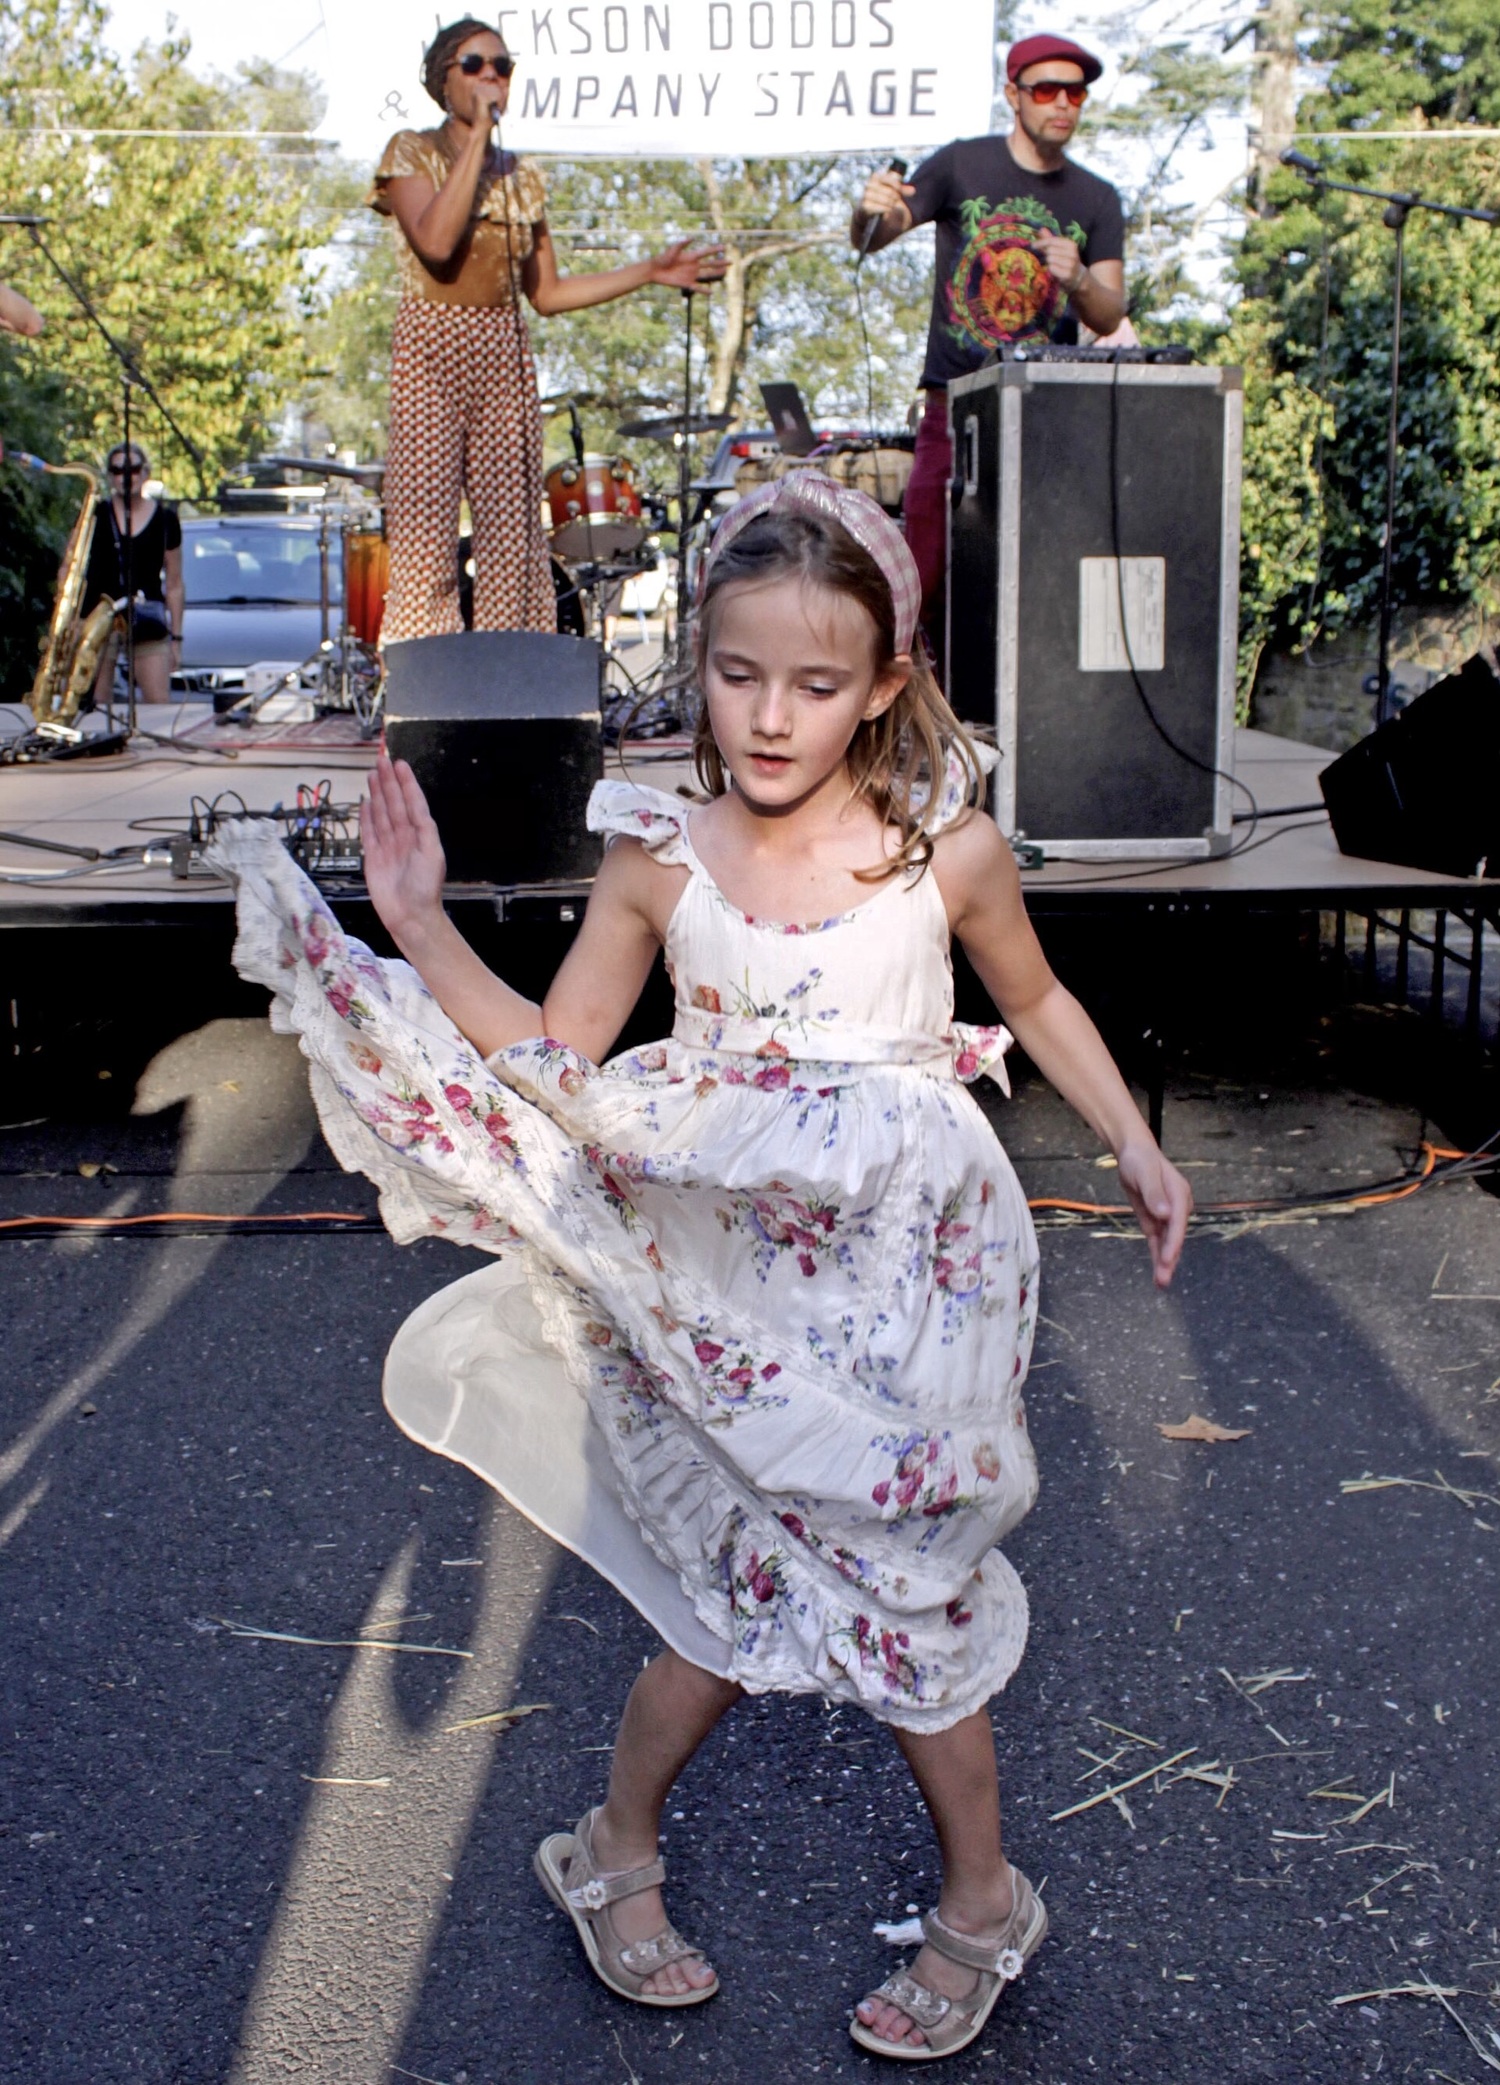 A young fan dances to a performance by Soul Inscribed at the Sag Harbor American Music Festival in 2019.  TOM KOCHIE